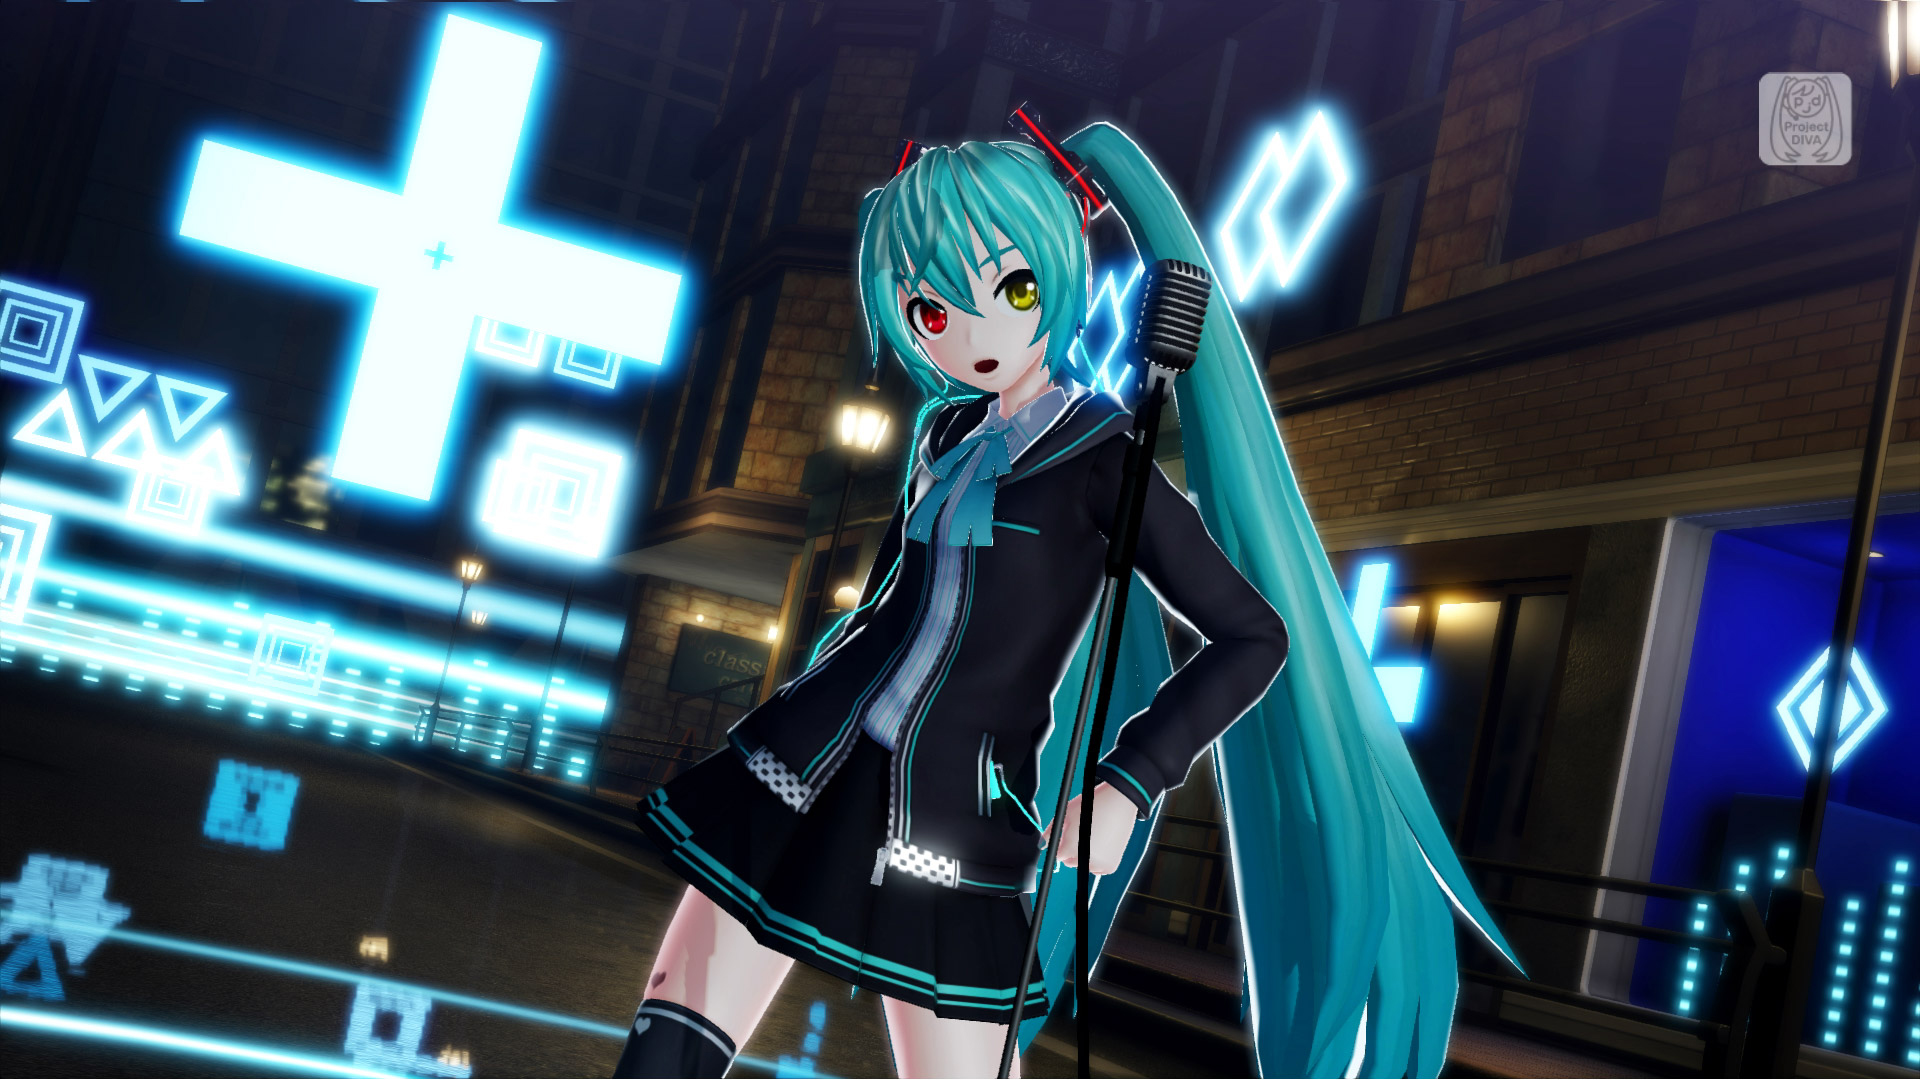 Vr Future Live To Launch Alongside Playstation Vr - Hatsune Miku Vr , HD Wallpaper & Backgrounds